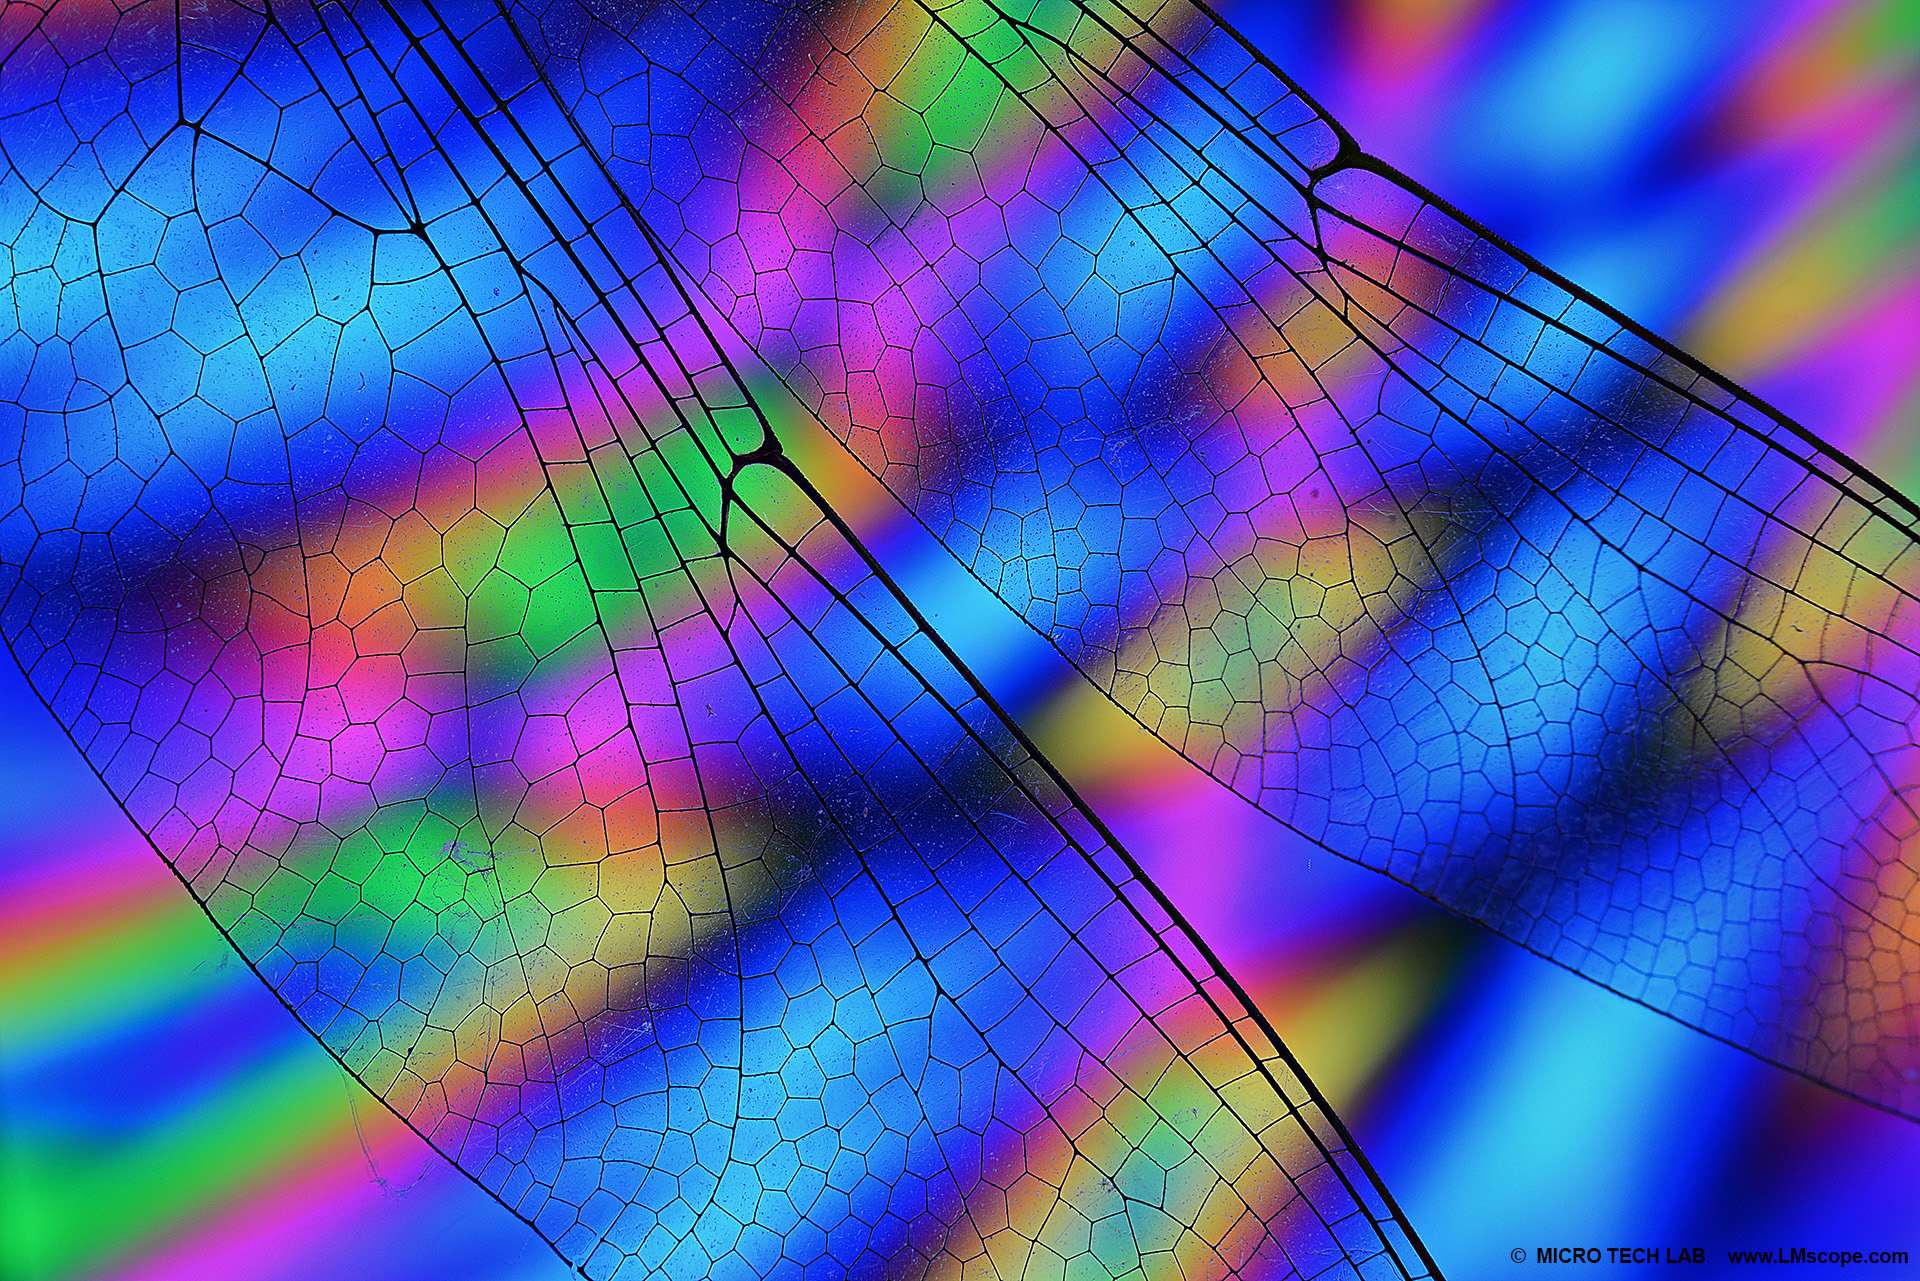 Insect wing under the microscope